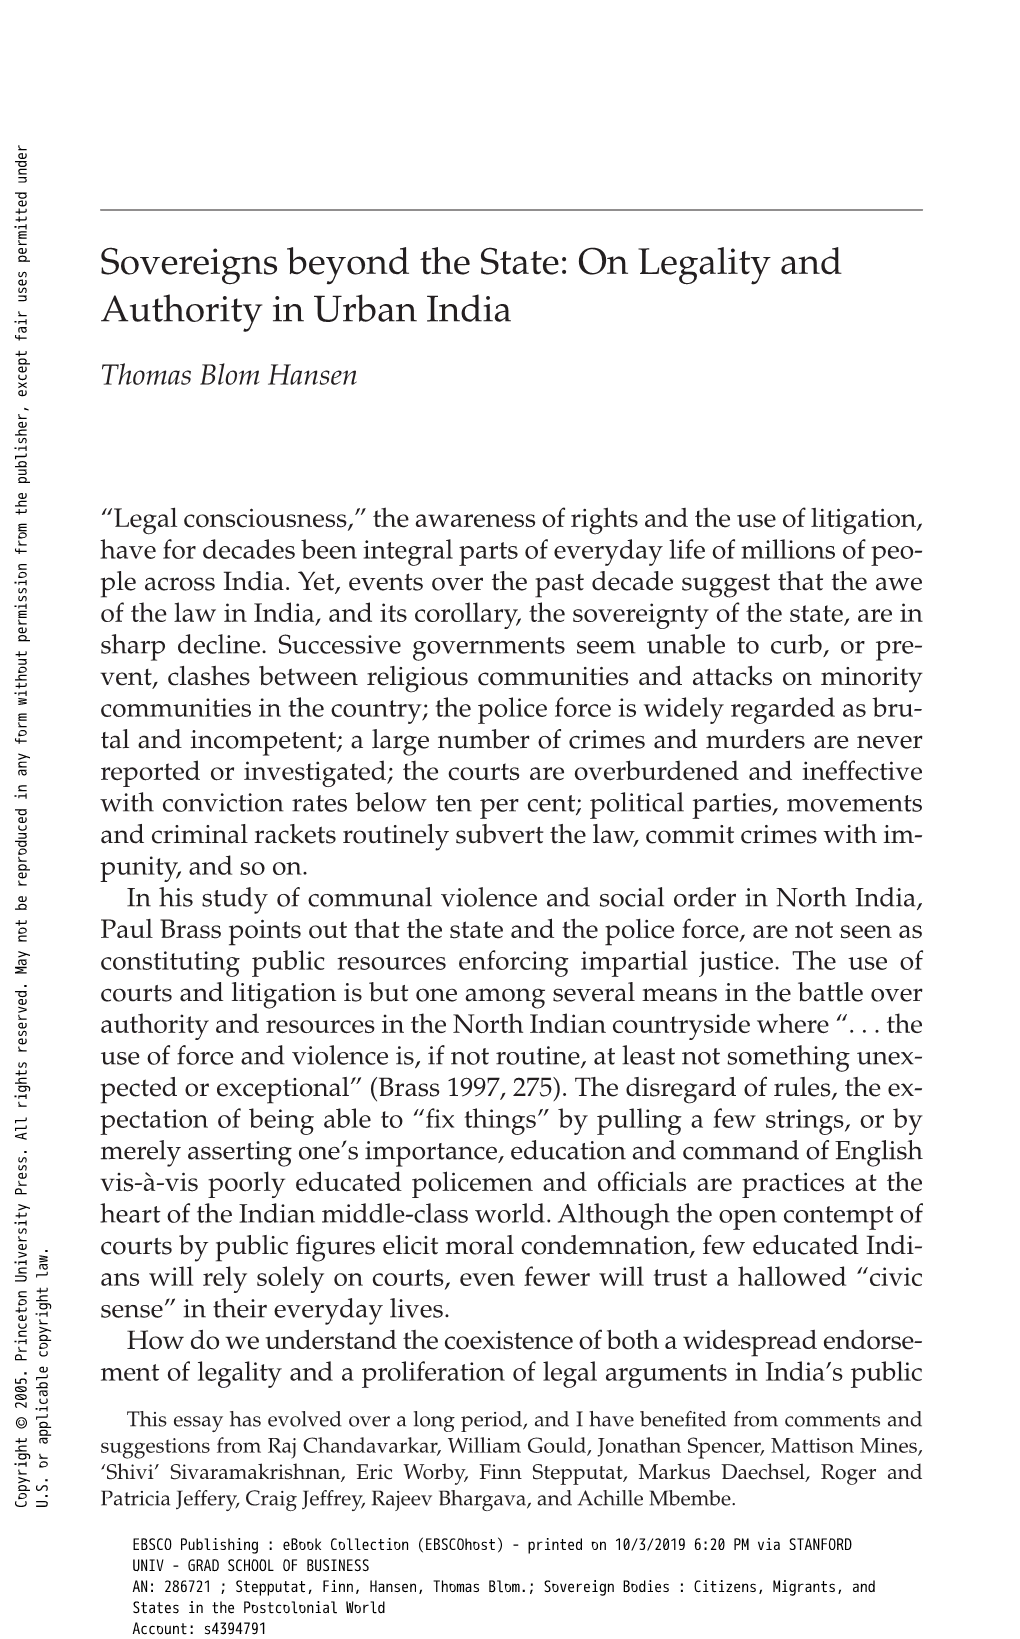 Sovereigns Beyond the State: on Legality and Authority in Urban India